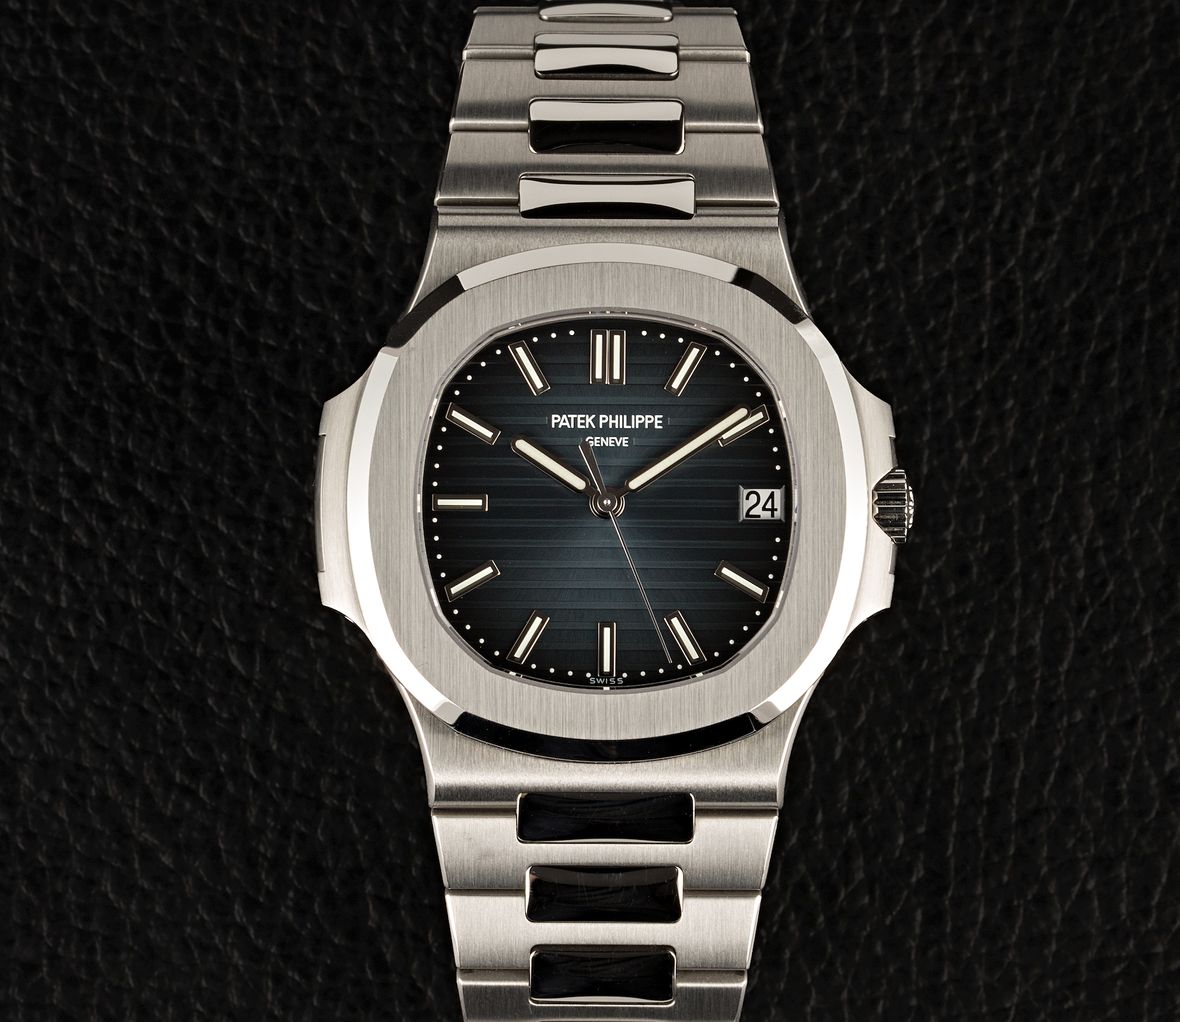 Patek Philippe in the Modern Era: The Rise to the Top